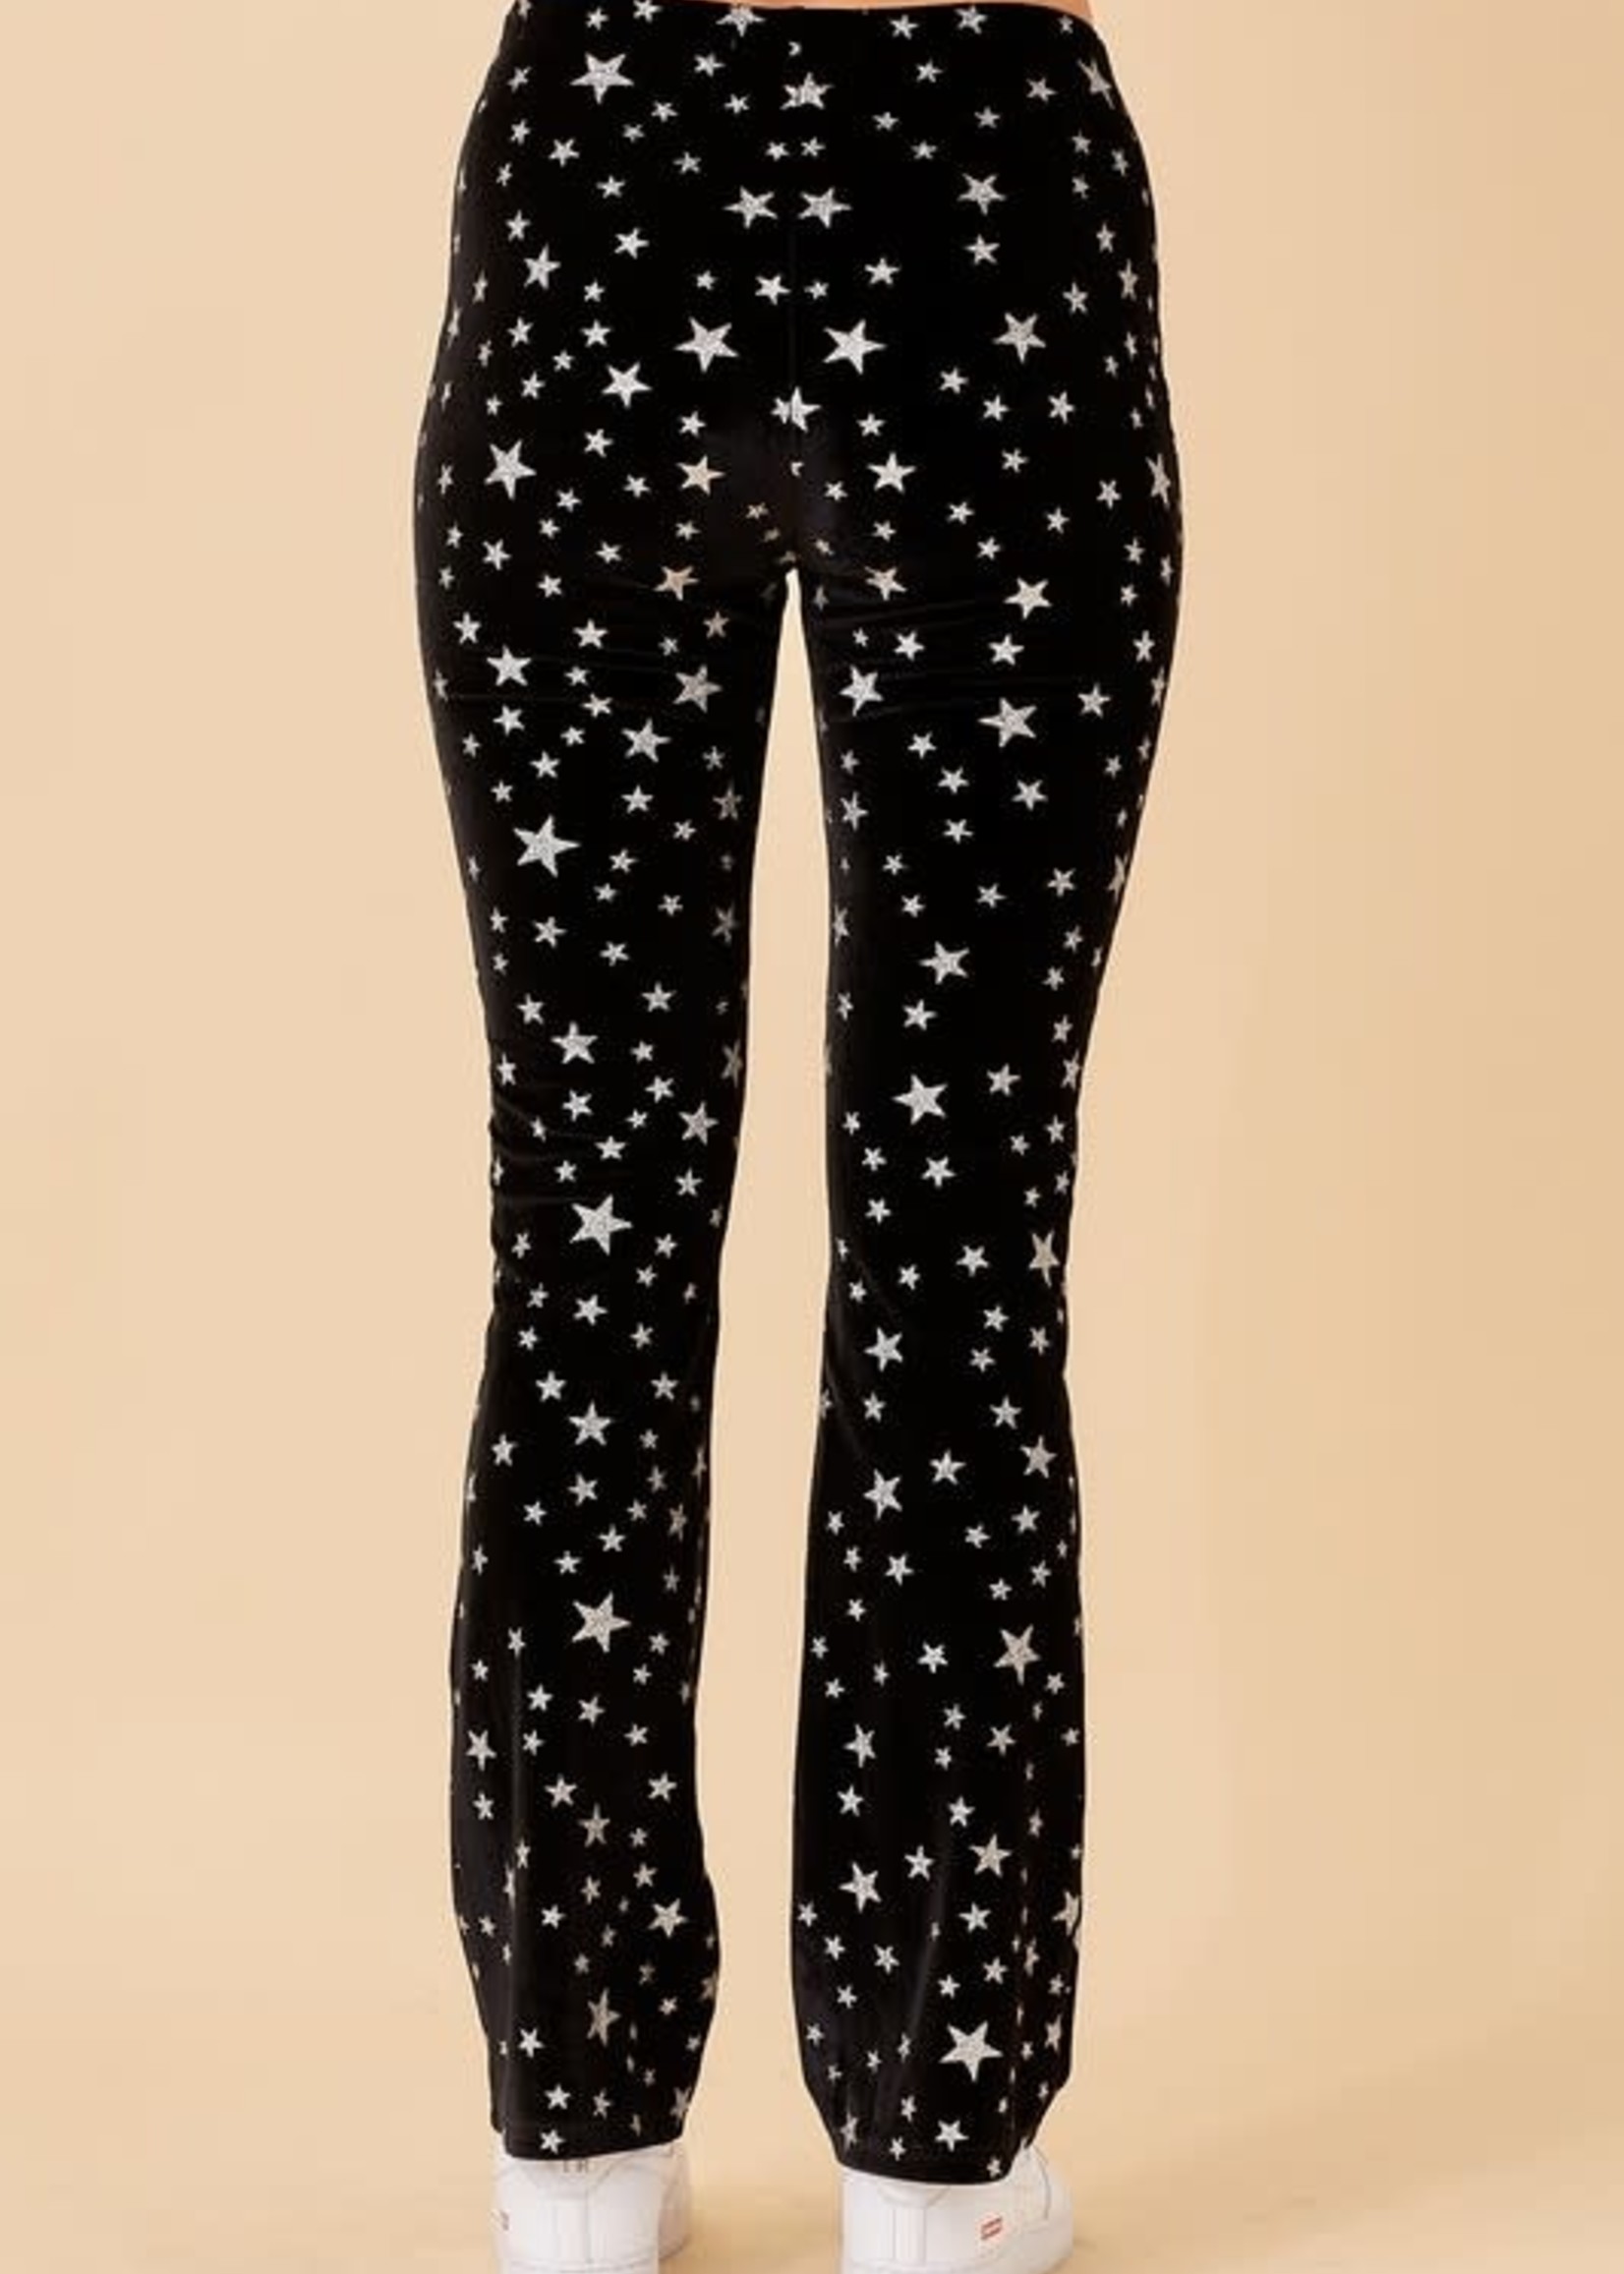 party pants | Nordstrom